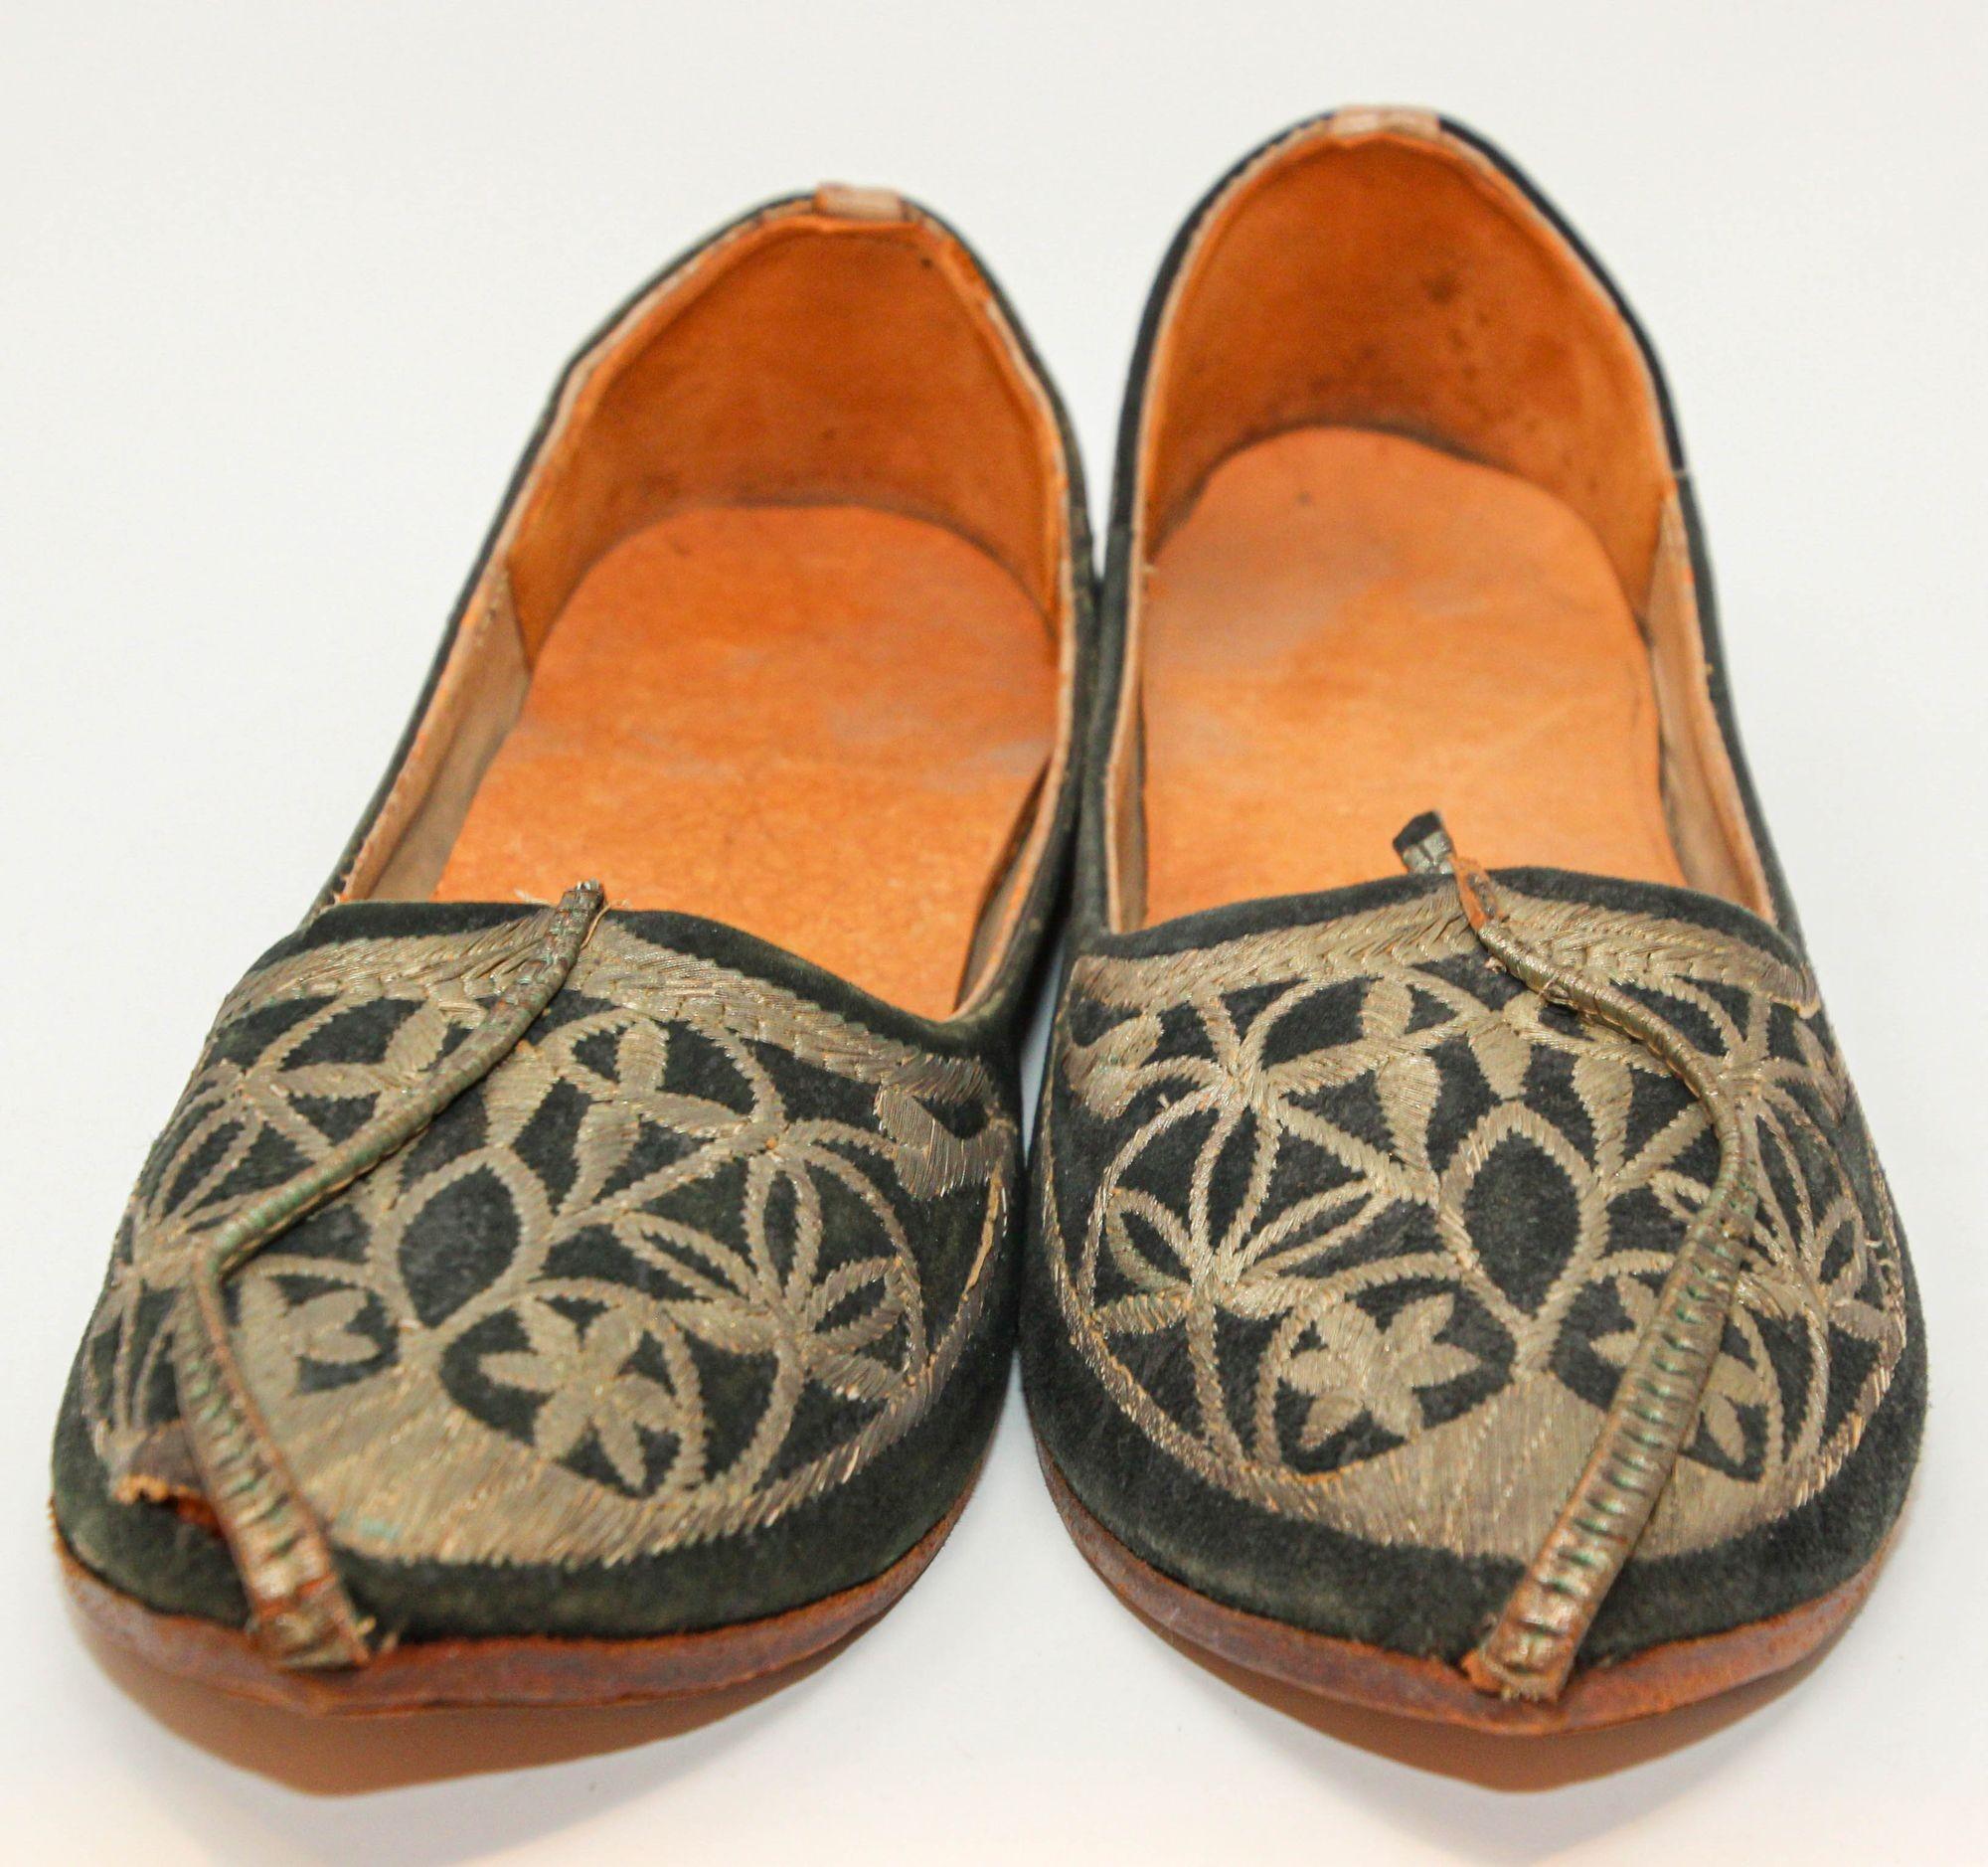 Indian Moorish Mughal Style Curled Toe Black Leather Shoes from Tony Duquette Estate For Sale